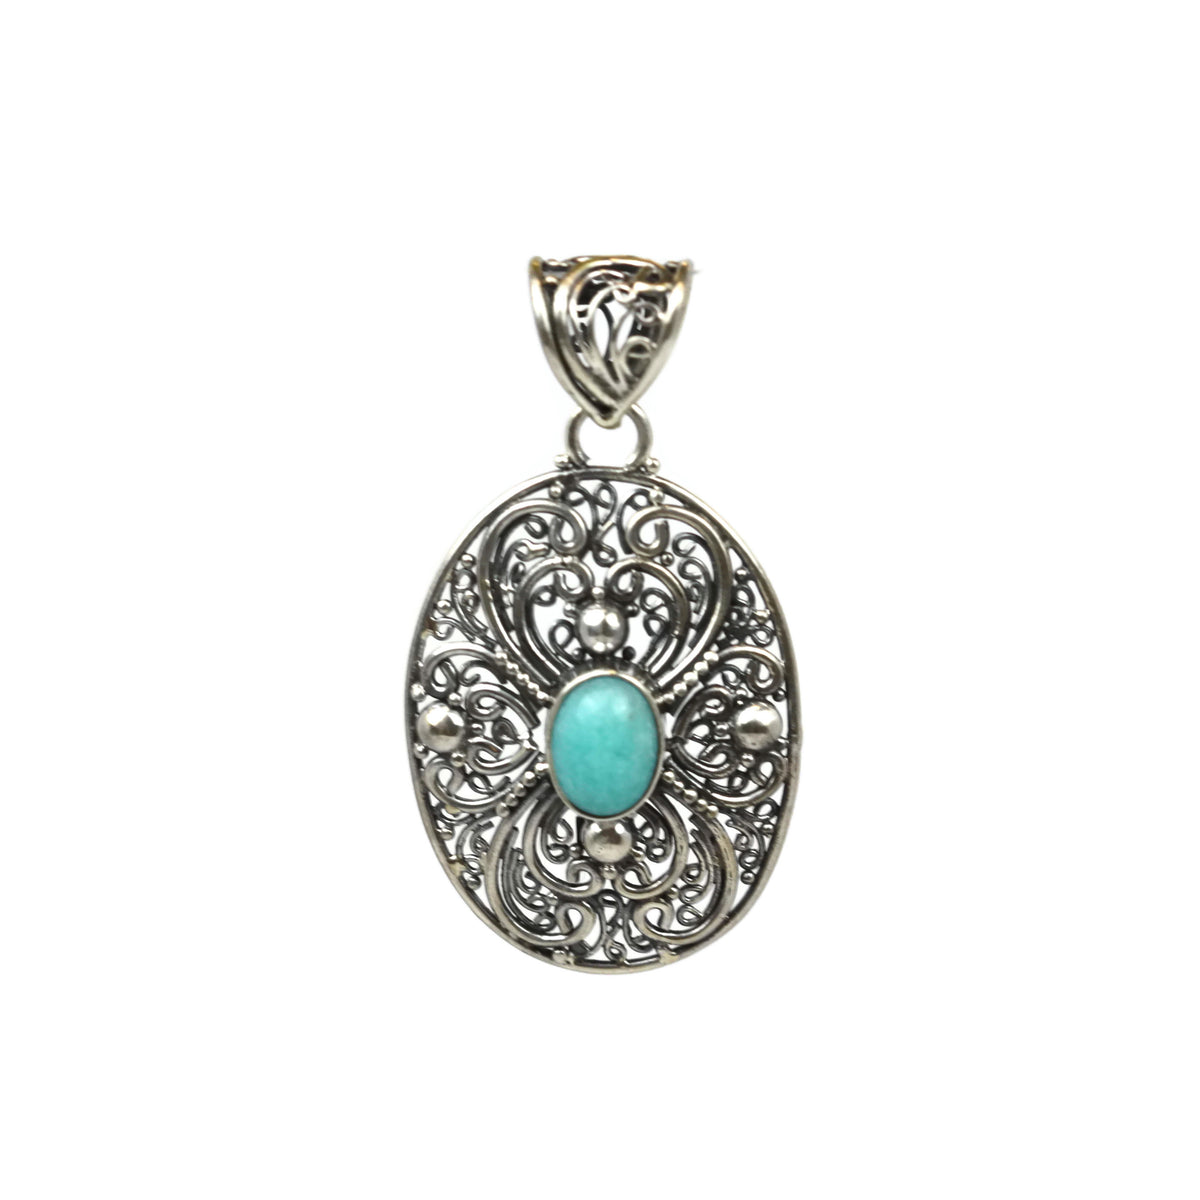 Handmade 925 Sterling Silver Antique Decorative Pendant With Oval Smooth Amazonite Gemstone